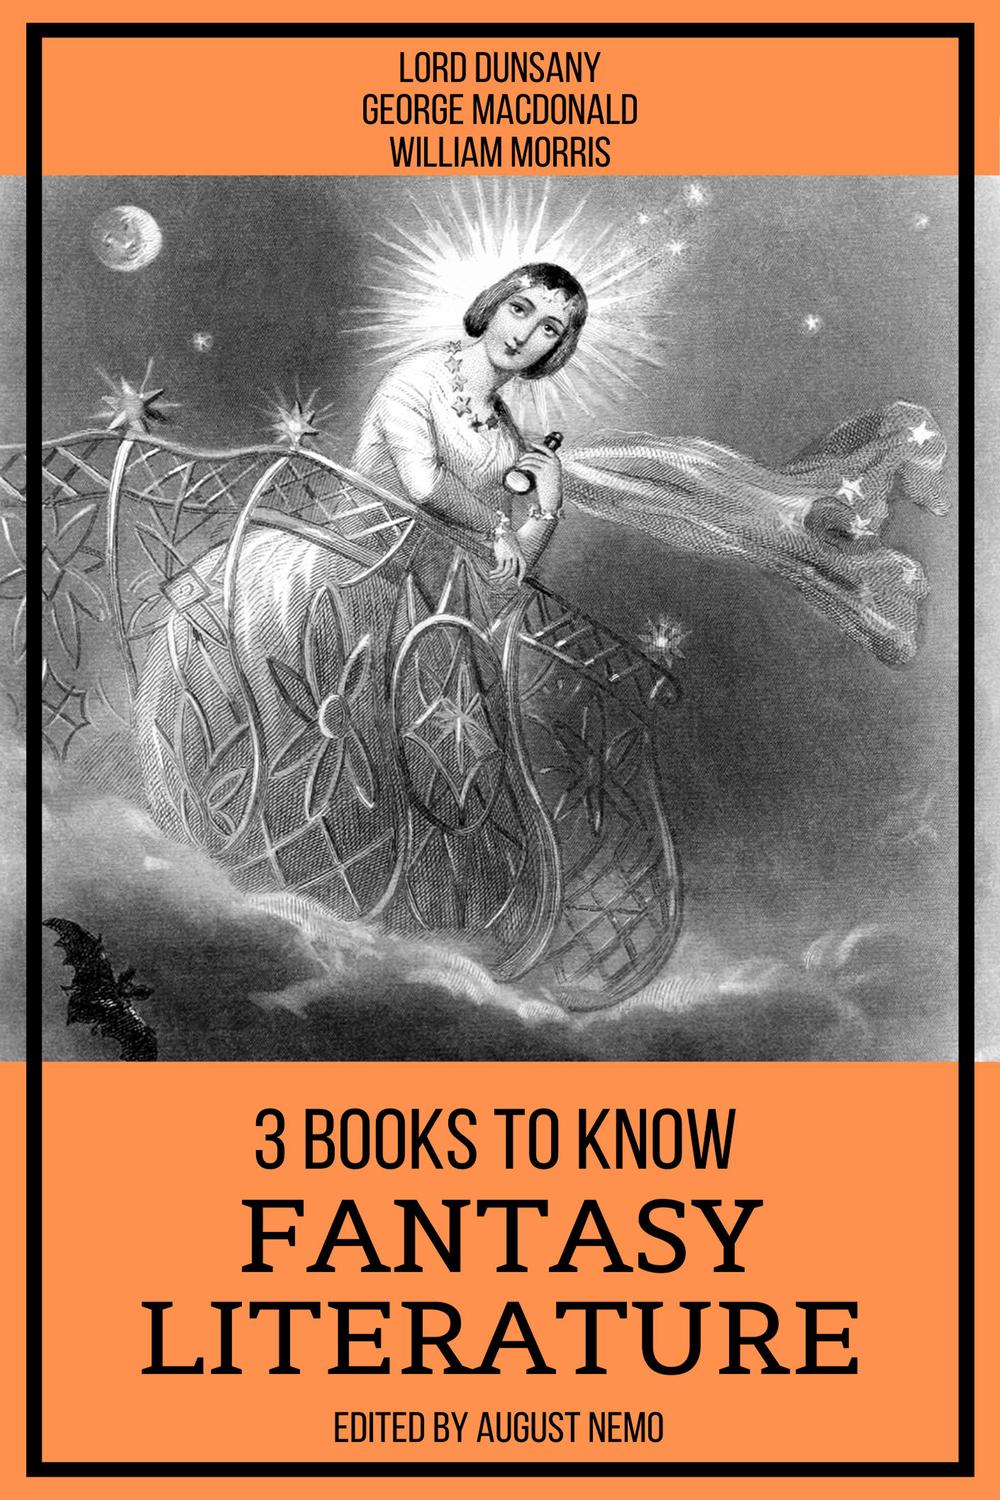 3 Books To Know Fantasy Literature - Lord Dunsany, George MacDonald, William Morris, August Nemo